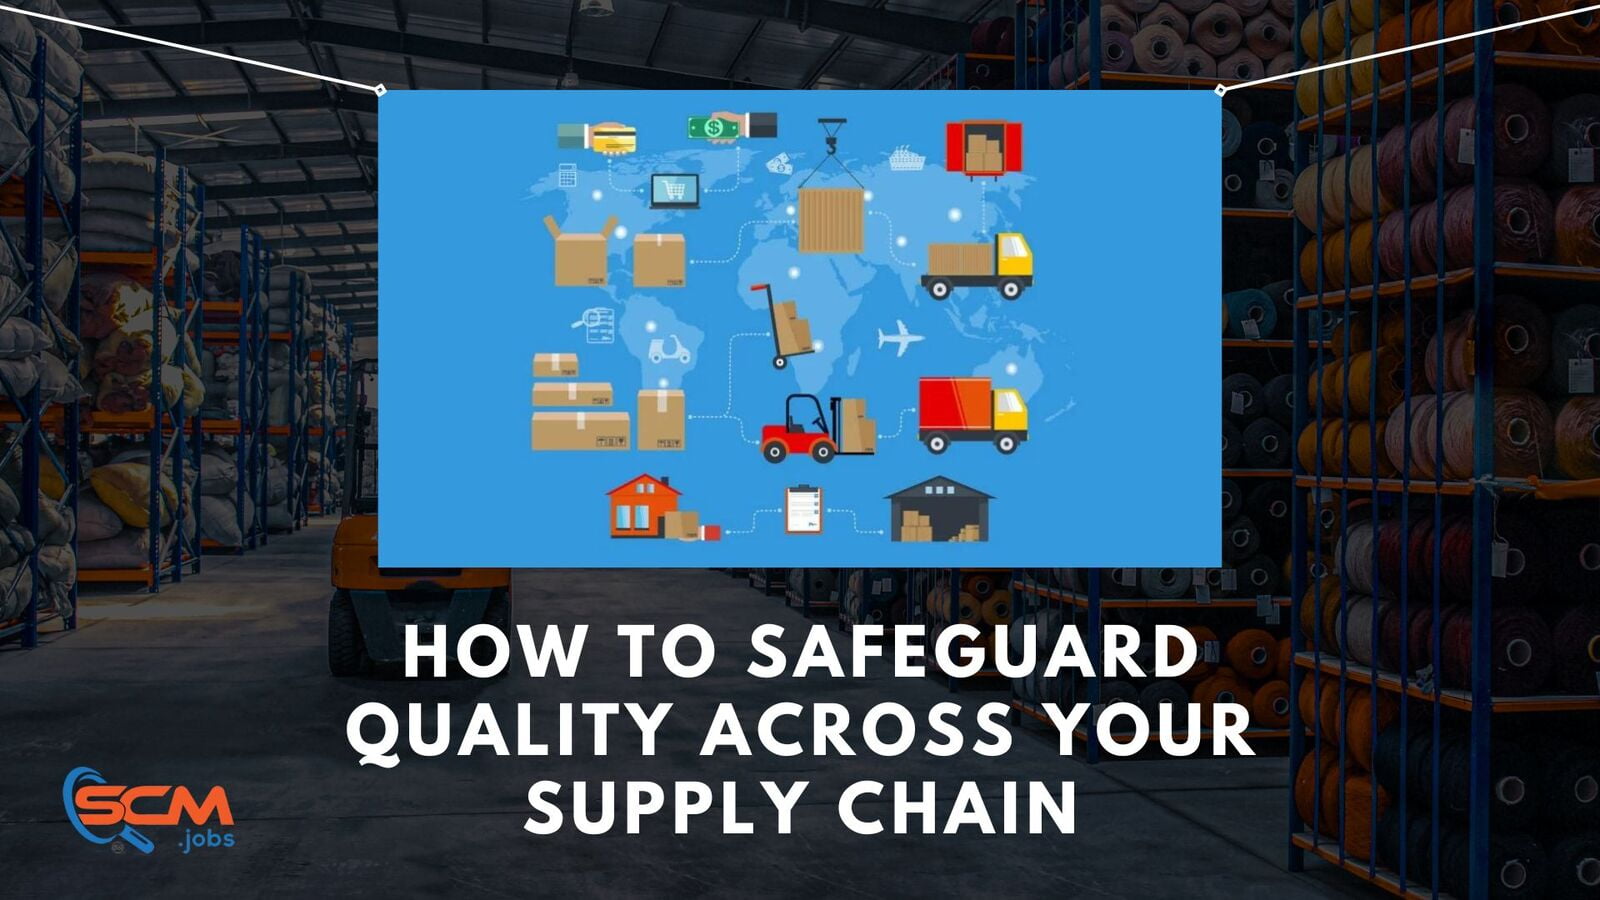 How to Safeguard Quality Across Your Supply Chain